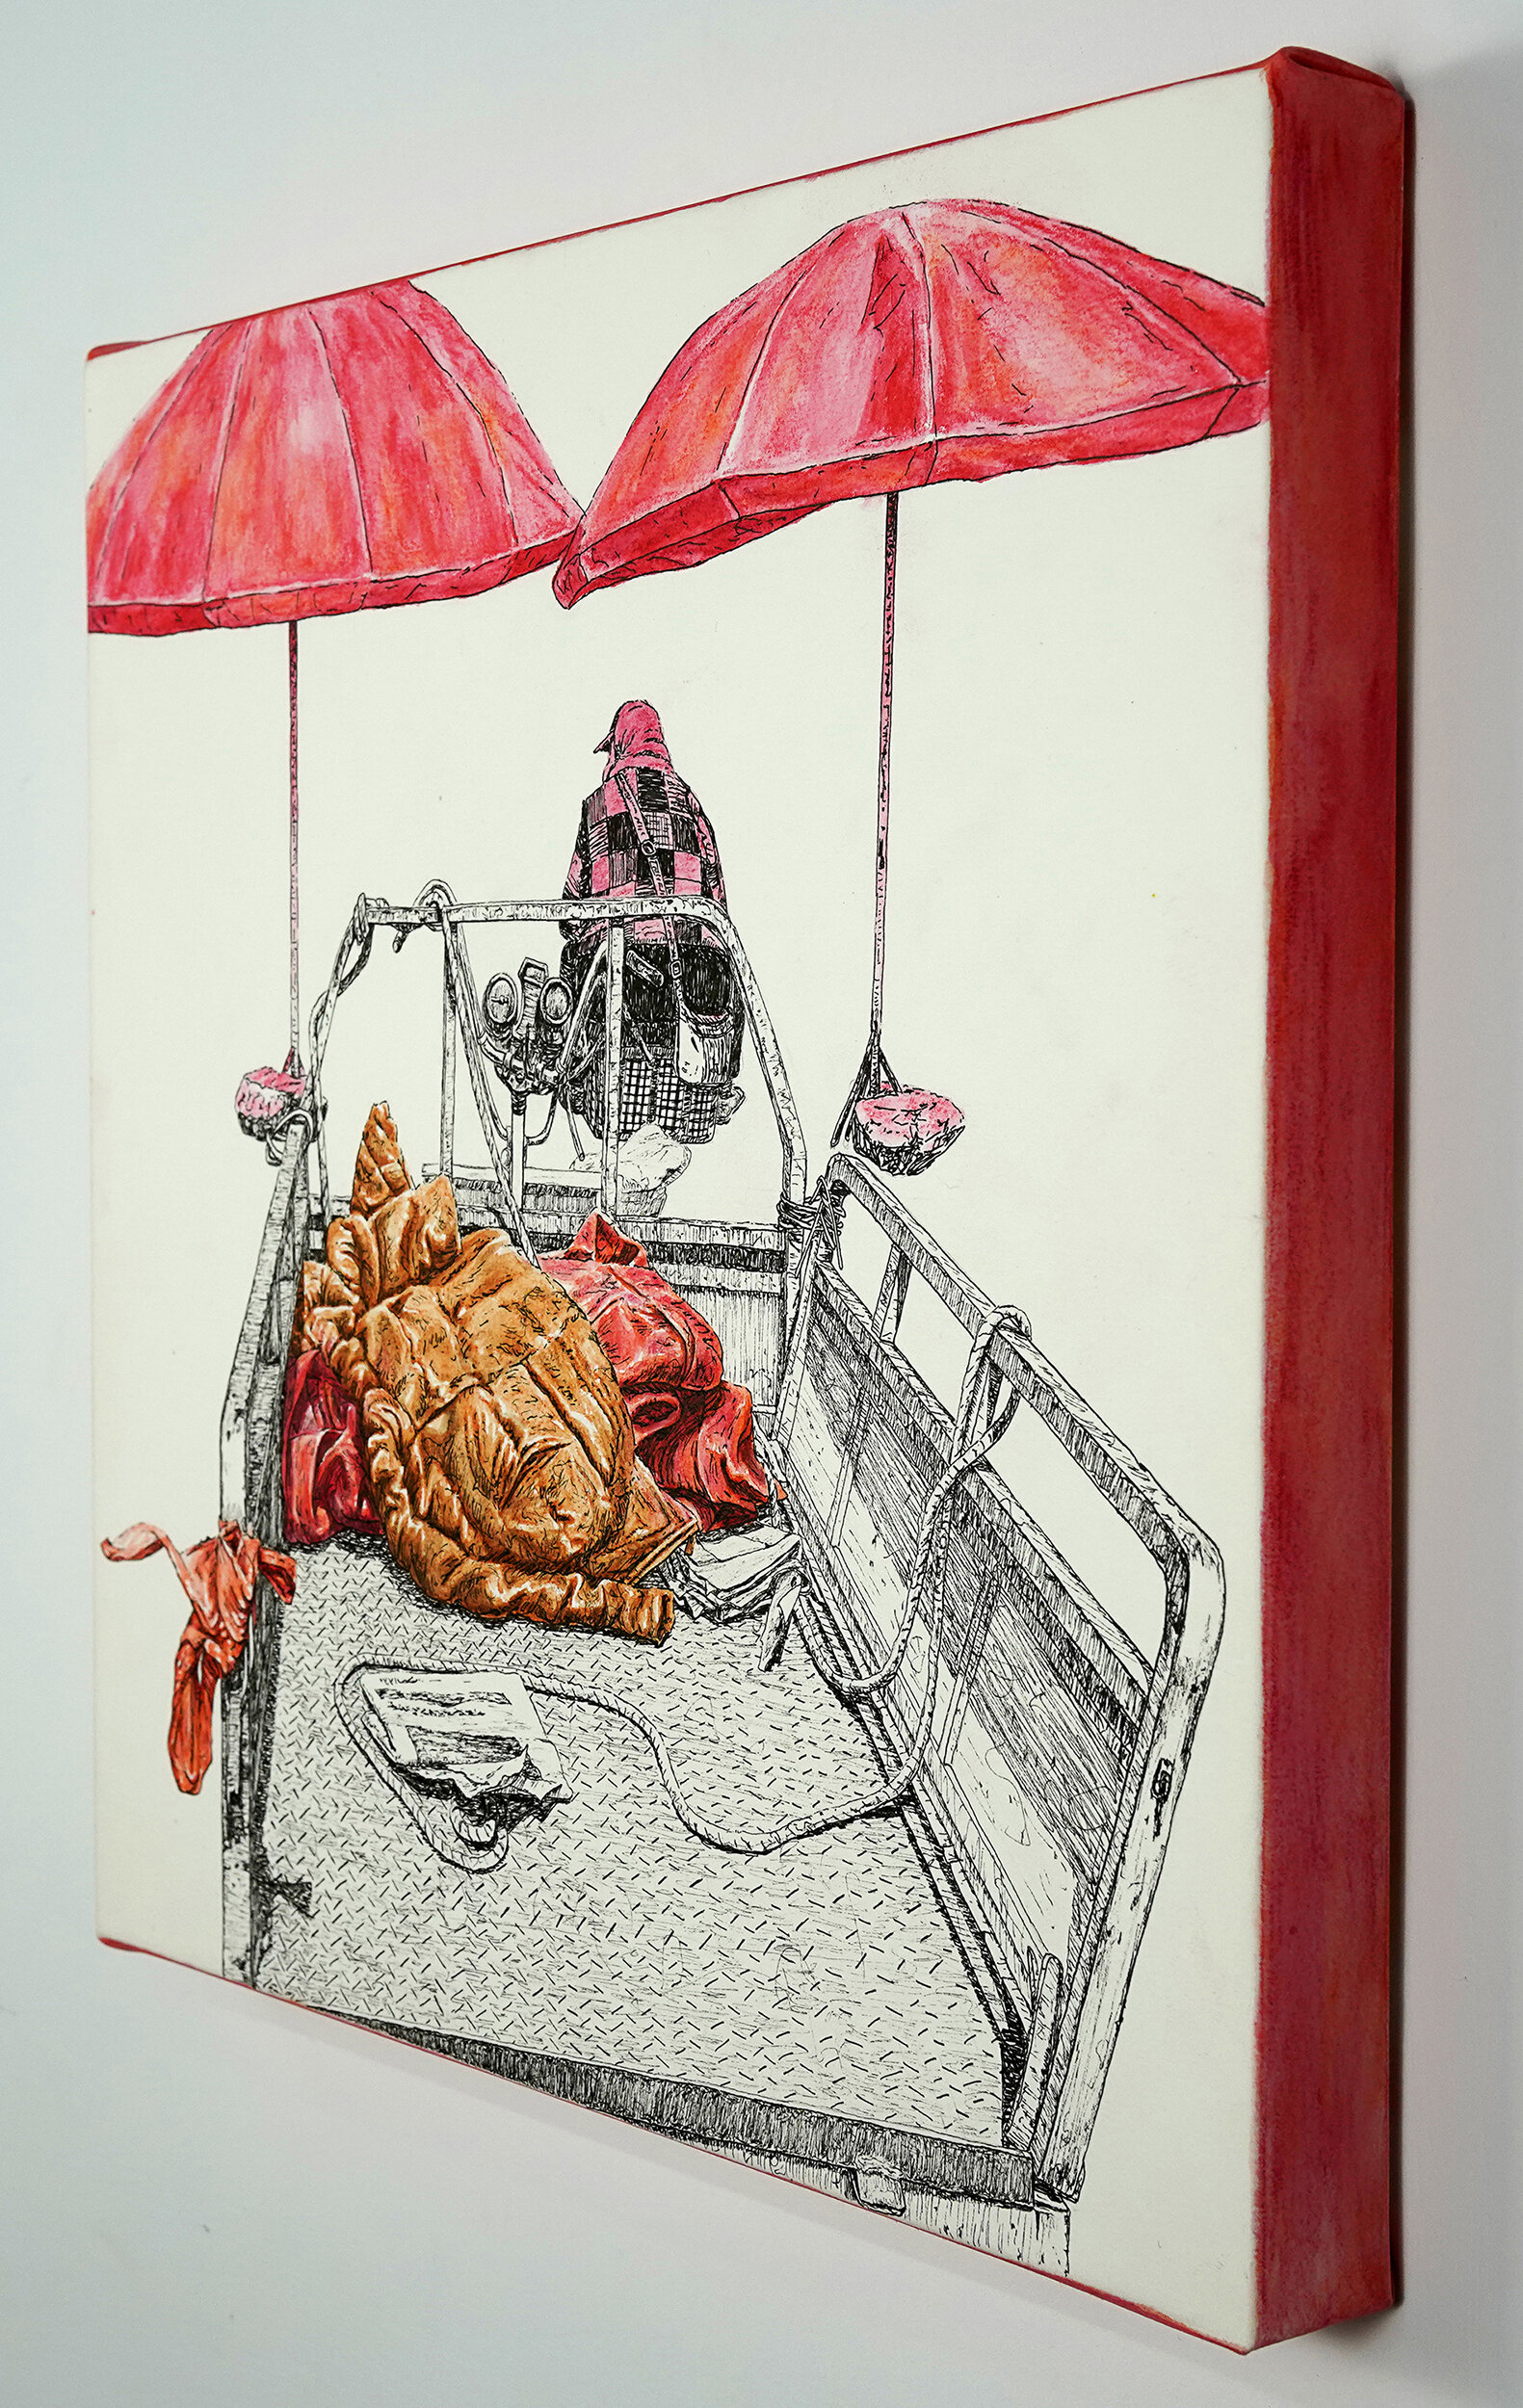   Under the Red Umbrellas  (side view) ,  2021, ink and watercolor pencil on paper, 30 x 30 cm 